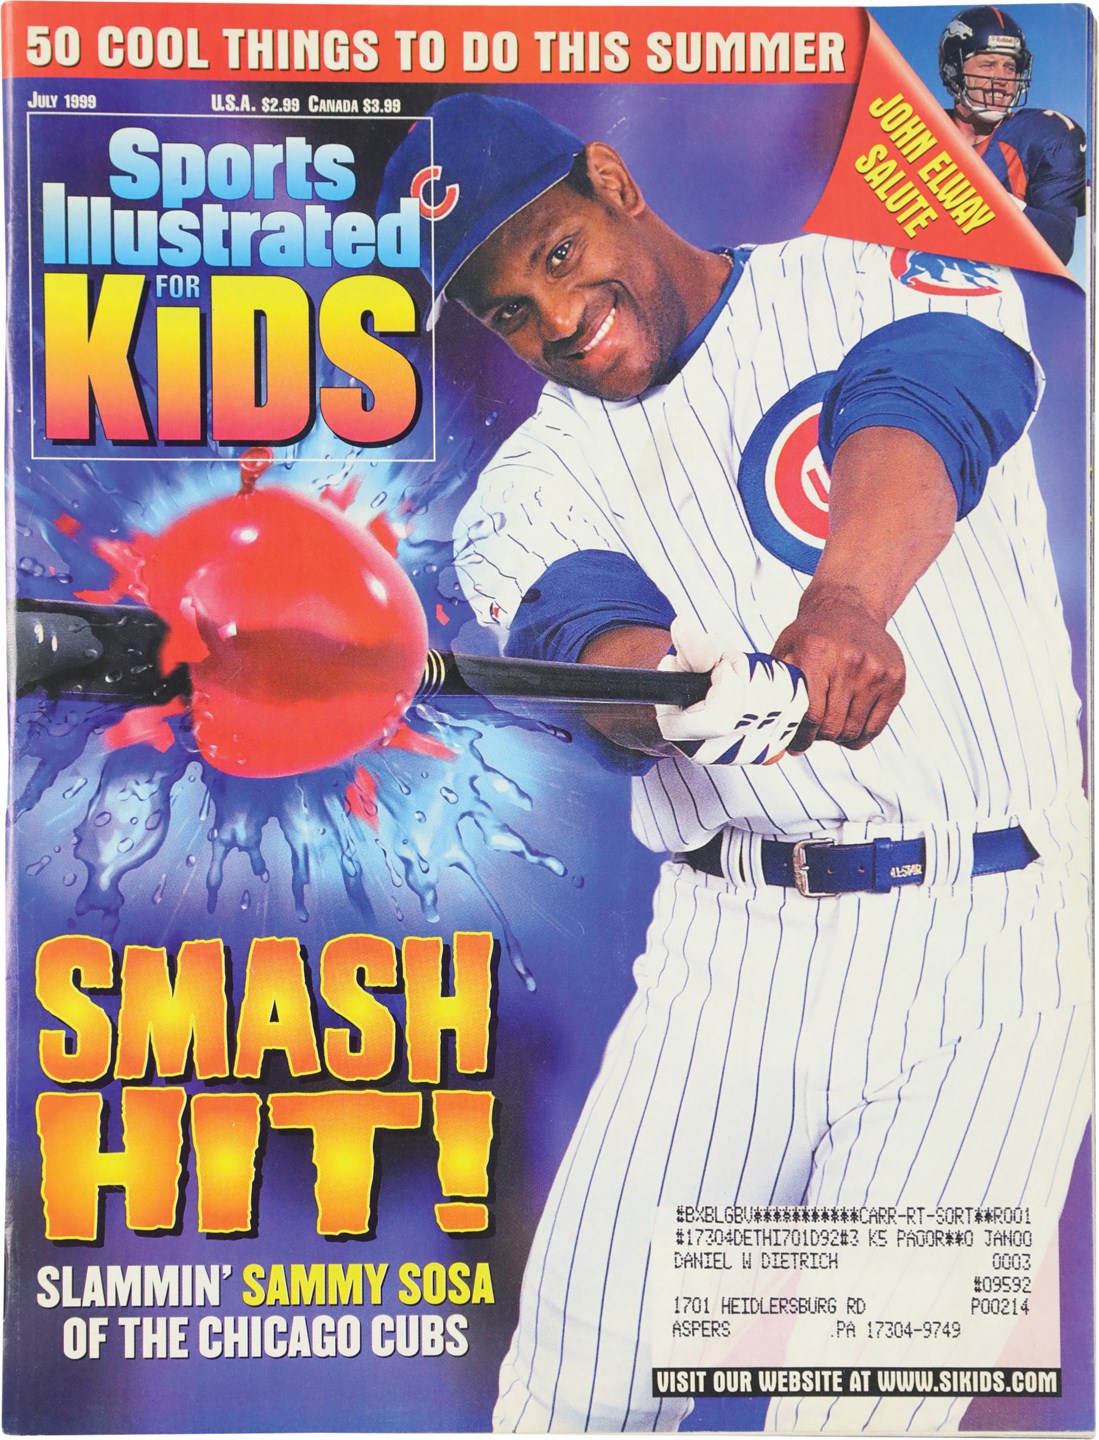 Olympics and All Sports - 1999 Sports Illustrated For Kids Full Magazine w/High Grade Serena Williams Rookie Card